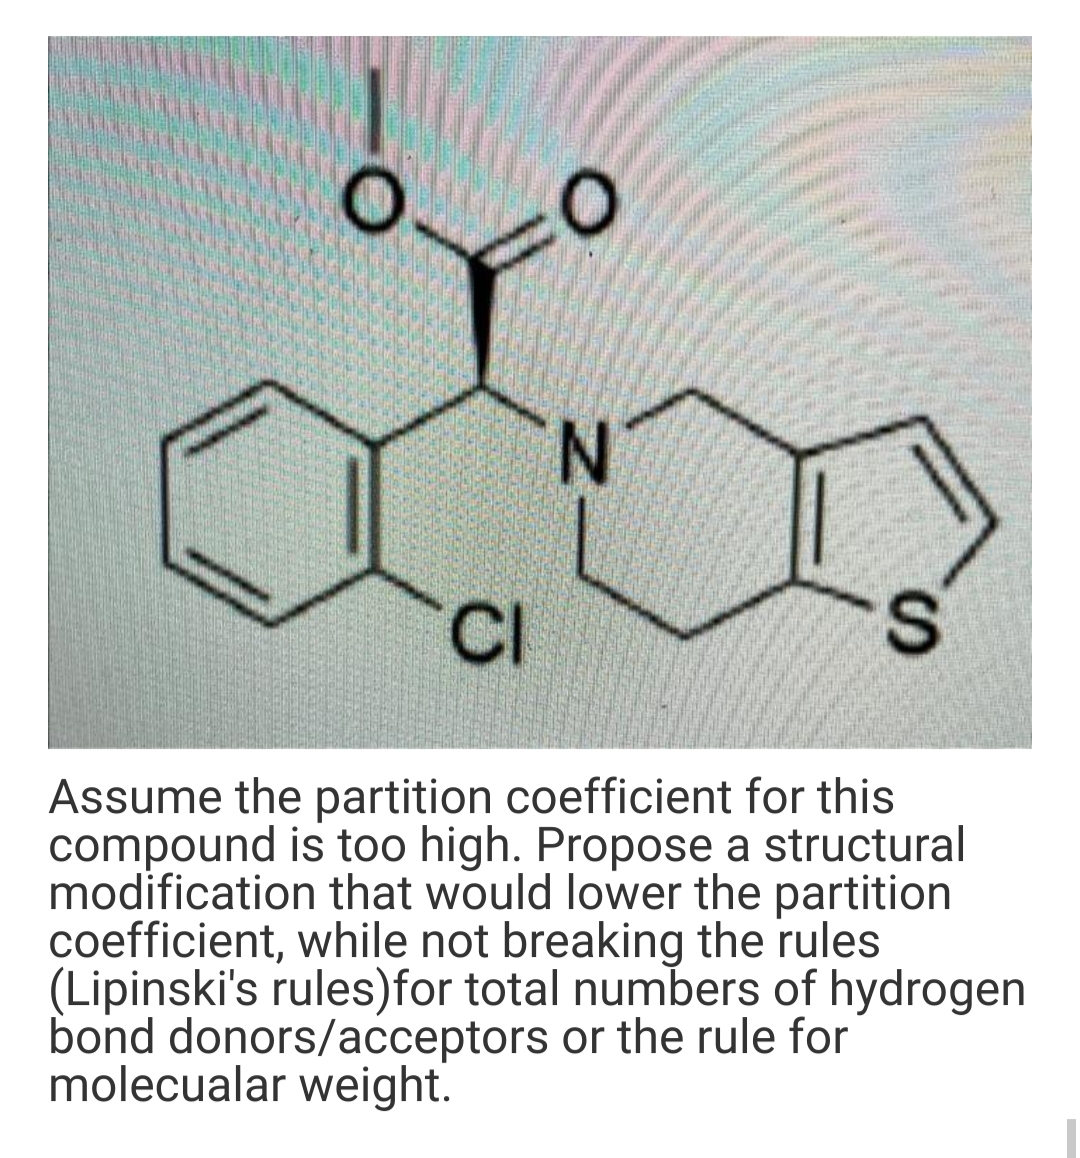 N.
CI
Assume the partition coefficient for this
compound is too high. Propose a structural
modification that would lower the partition
coefficient, while not breaking the rules
(Lipinski's rules)for total numbers of hydrogen
bond donors/acceptors or the rule for
molecualar weight.
